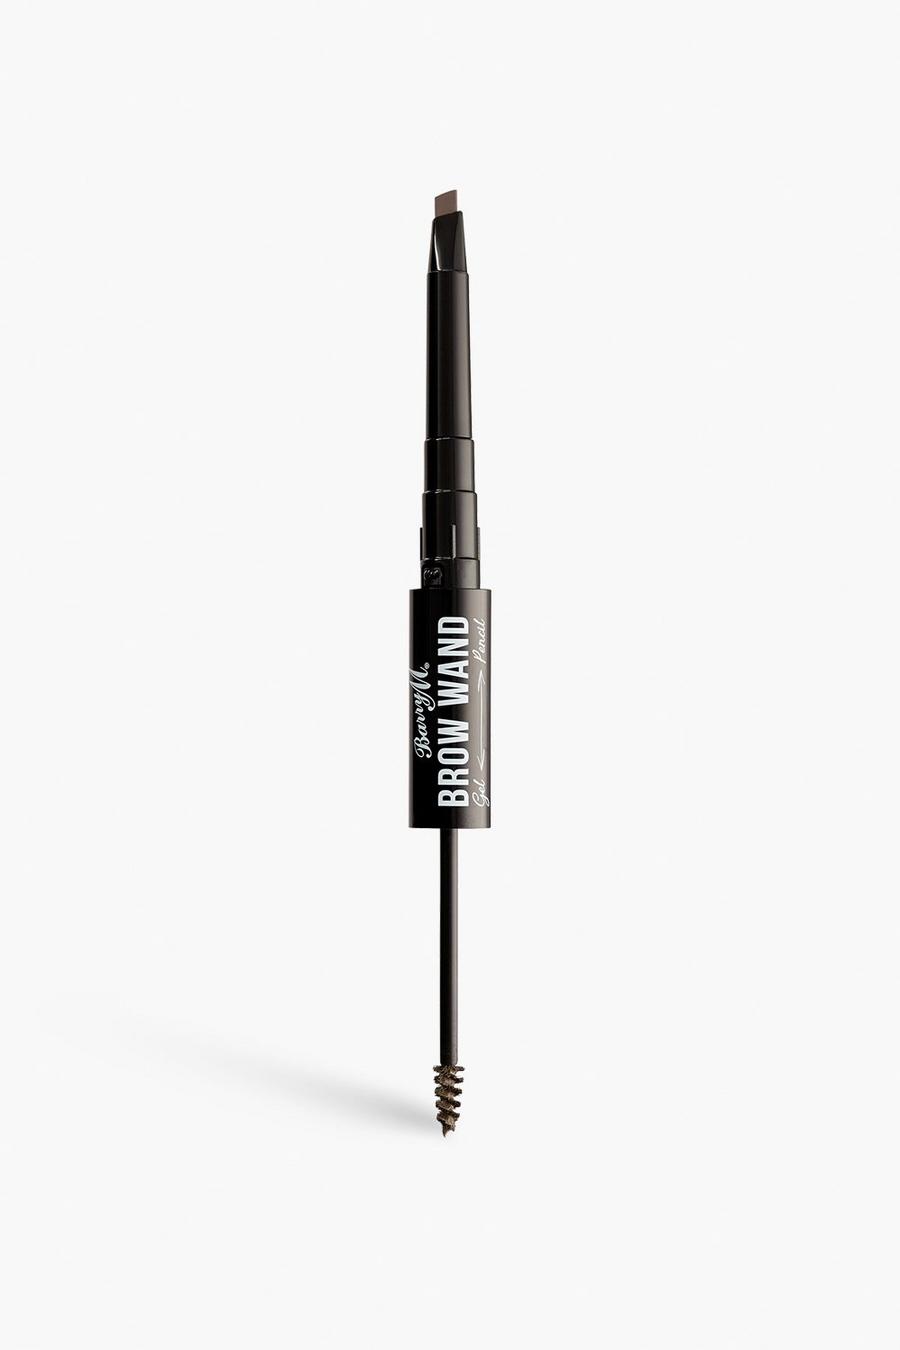 Brown Barry M Brow Wand - Dark image number 1